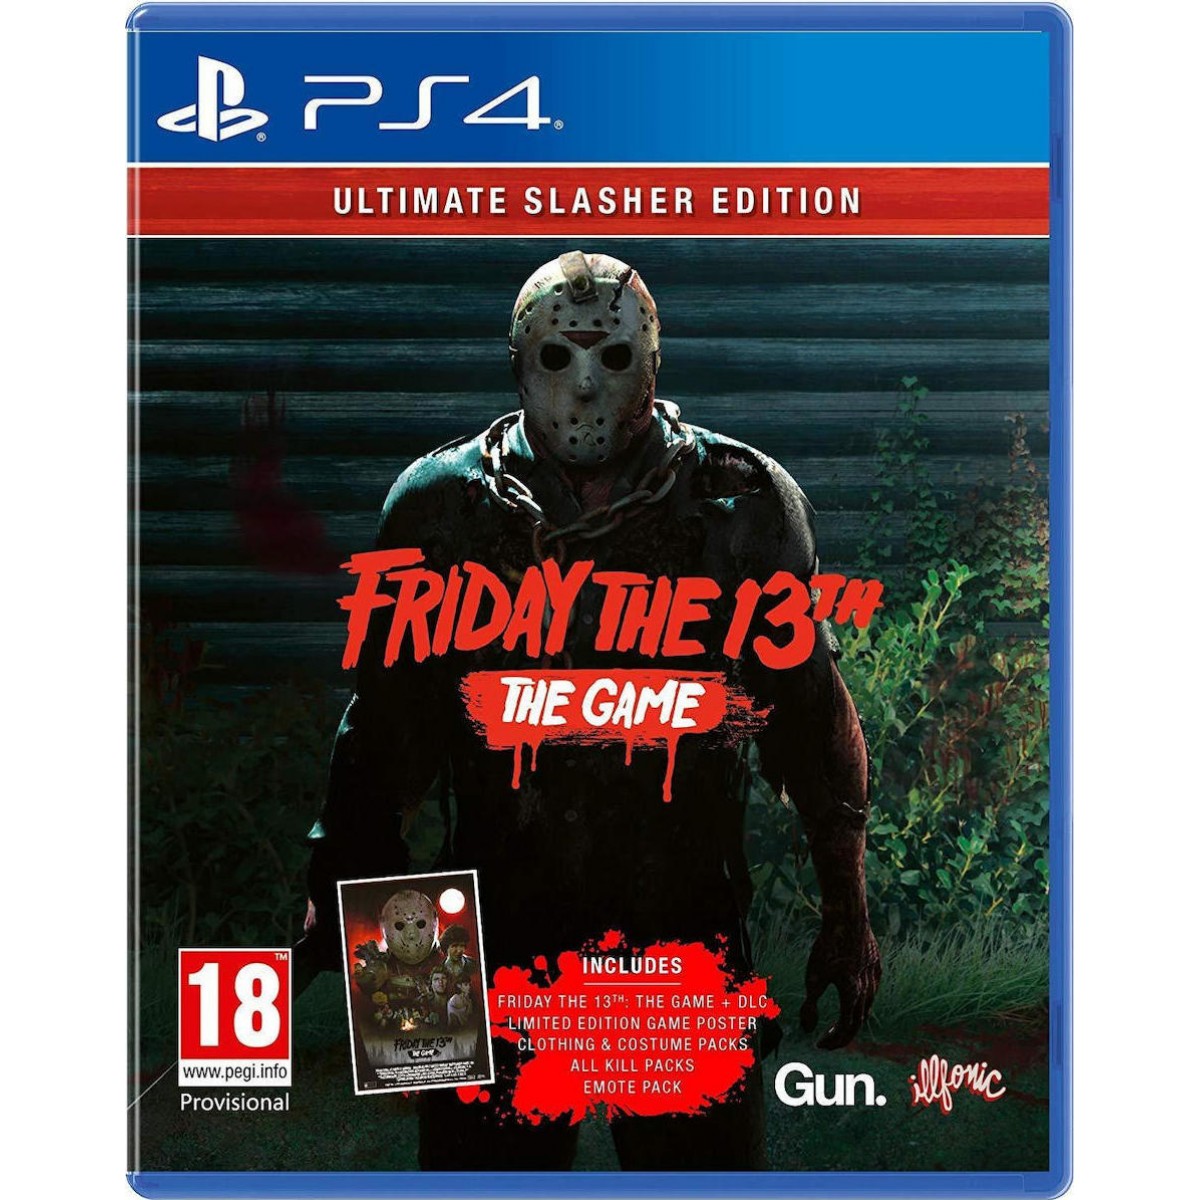 PS4 FRIDAY 13th ULTIMATE SLASHER EDITION GAME